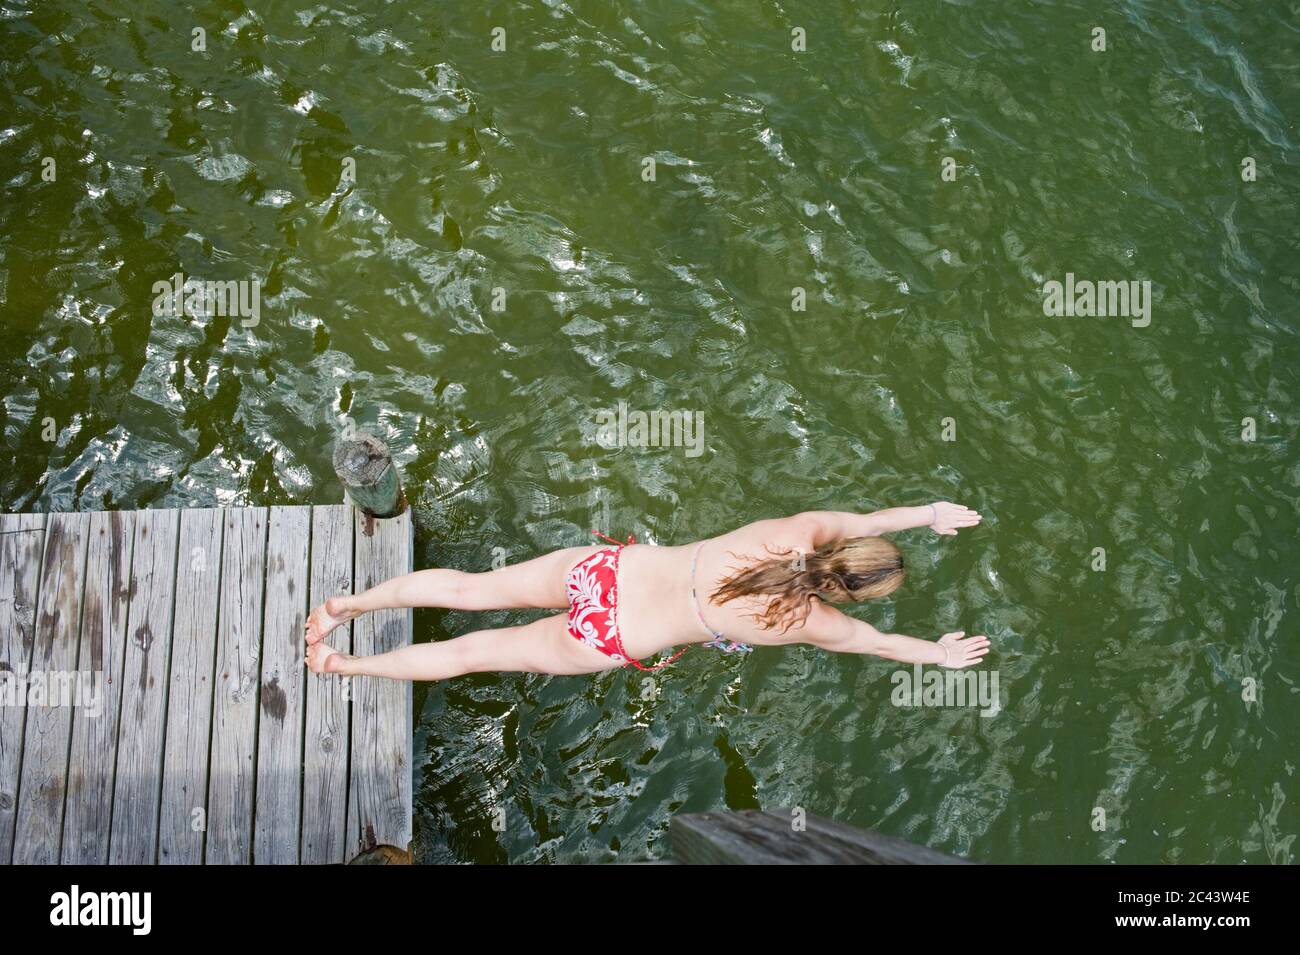 Woman jumps from a jetty into the water, Fort Walton Beach, Florida, USA Stock Photo